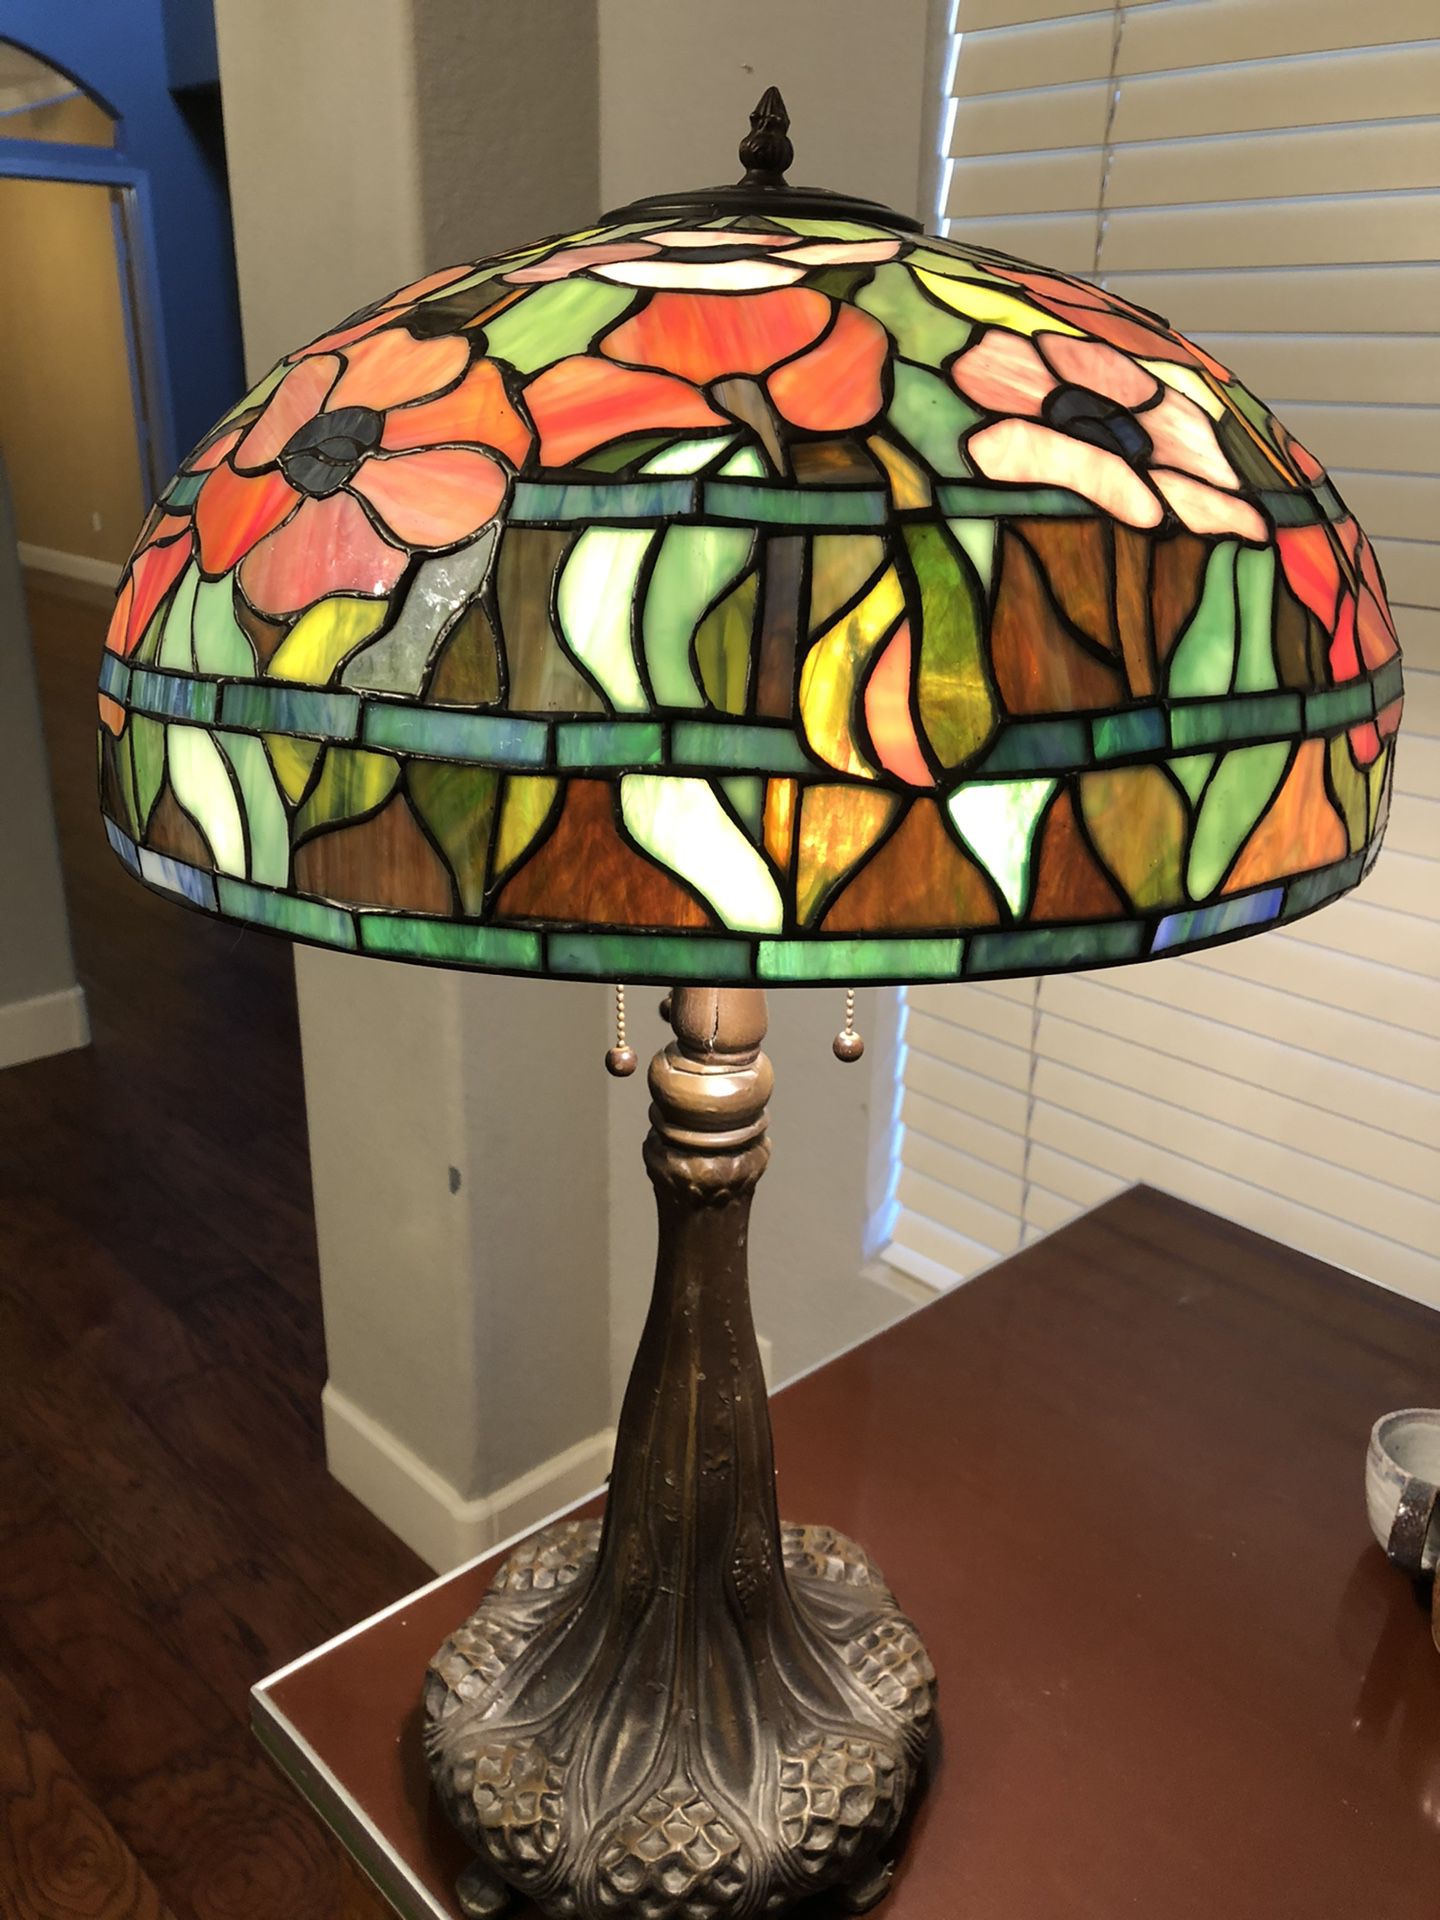 18” wide Tiffany style lamp